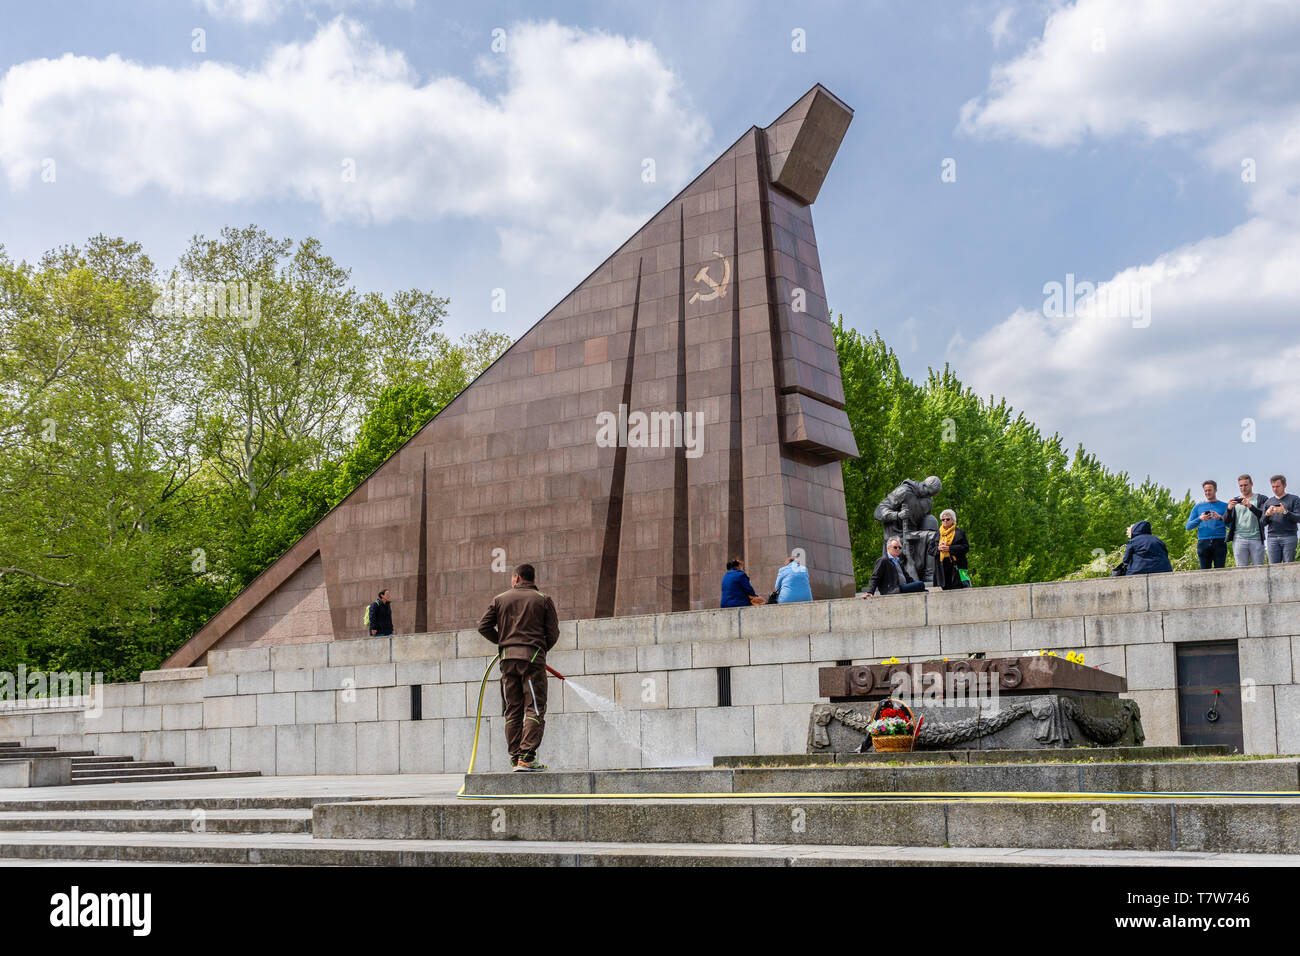 Statue of a kneeling  Soviet soldier in front of a stylized Soviet flag built from red granite at the Soviet War Memorial in Treptow, Berlin, Germany Stock Photo